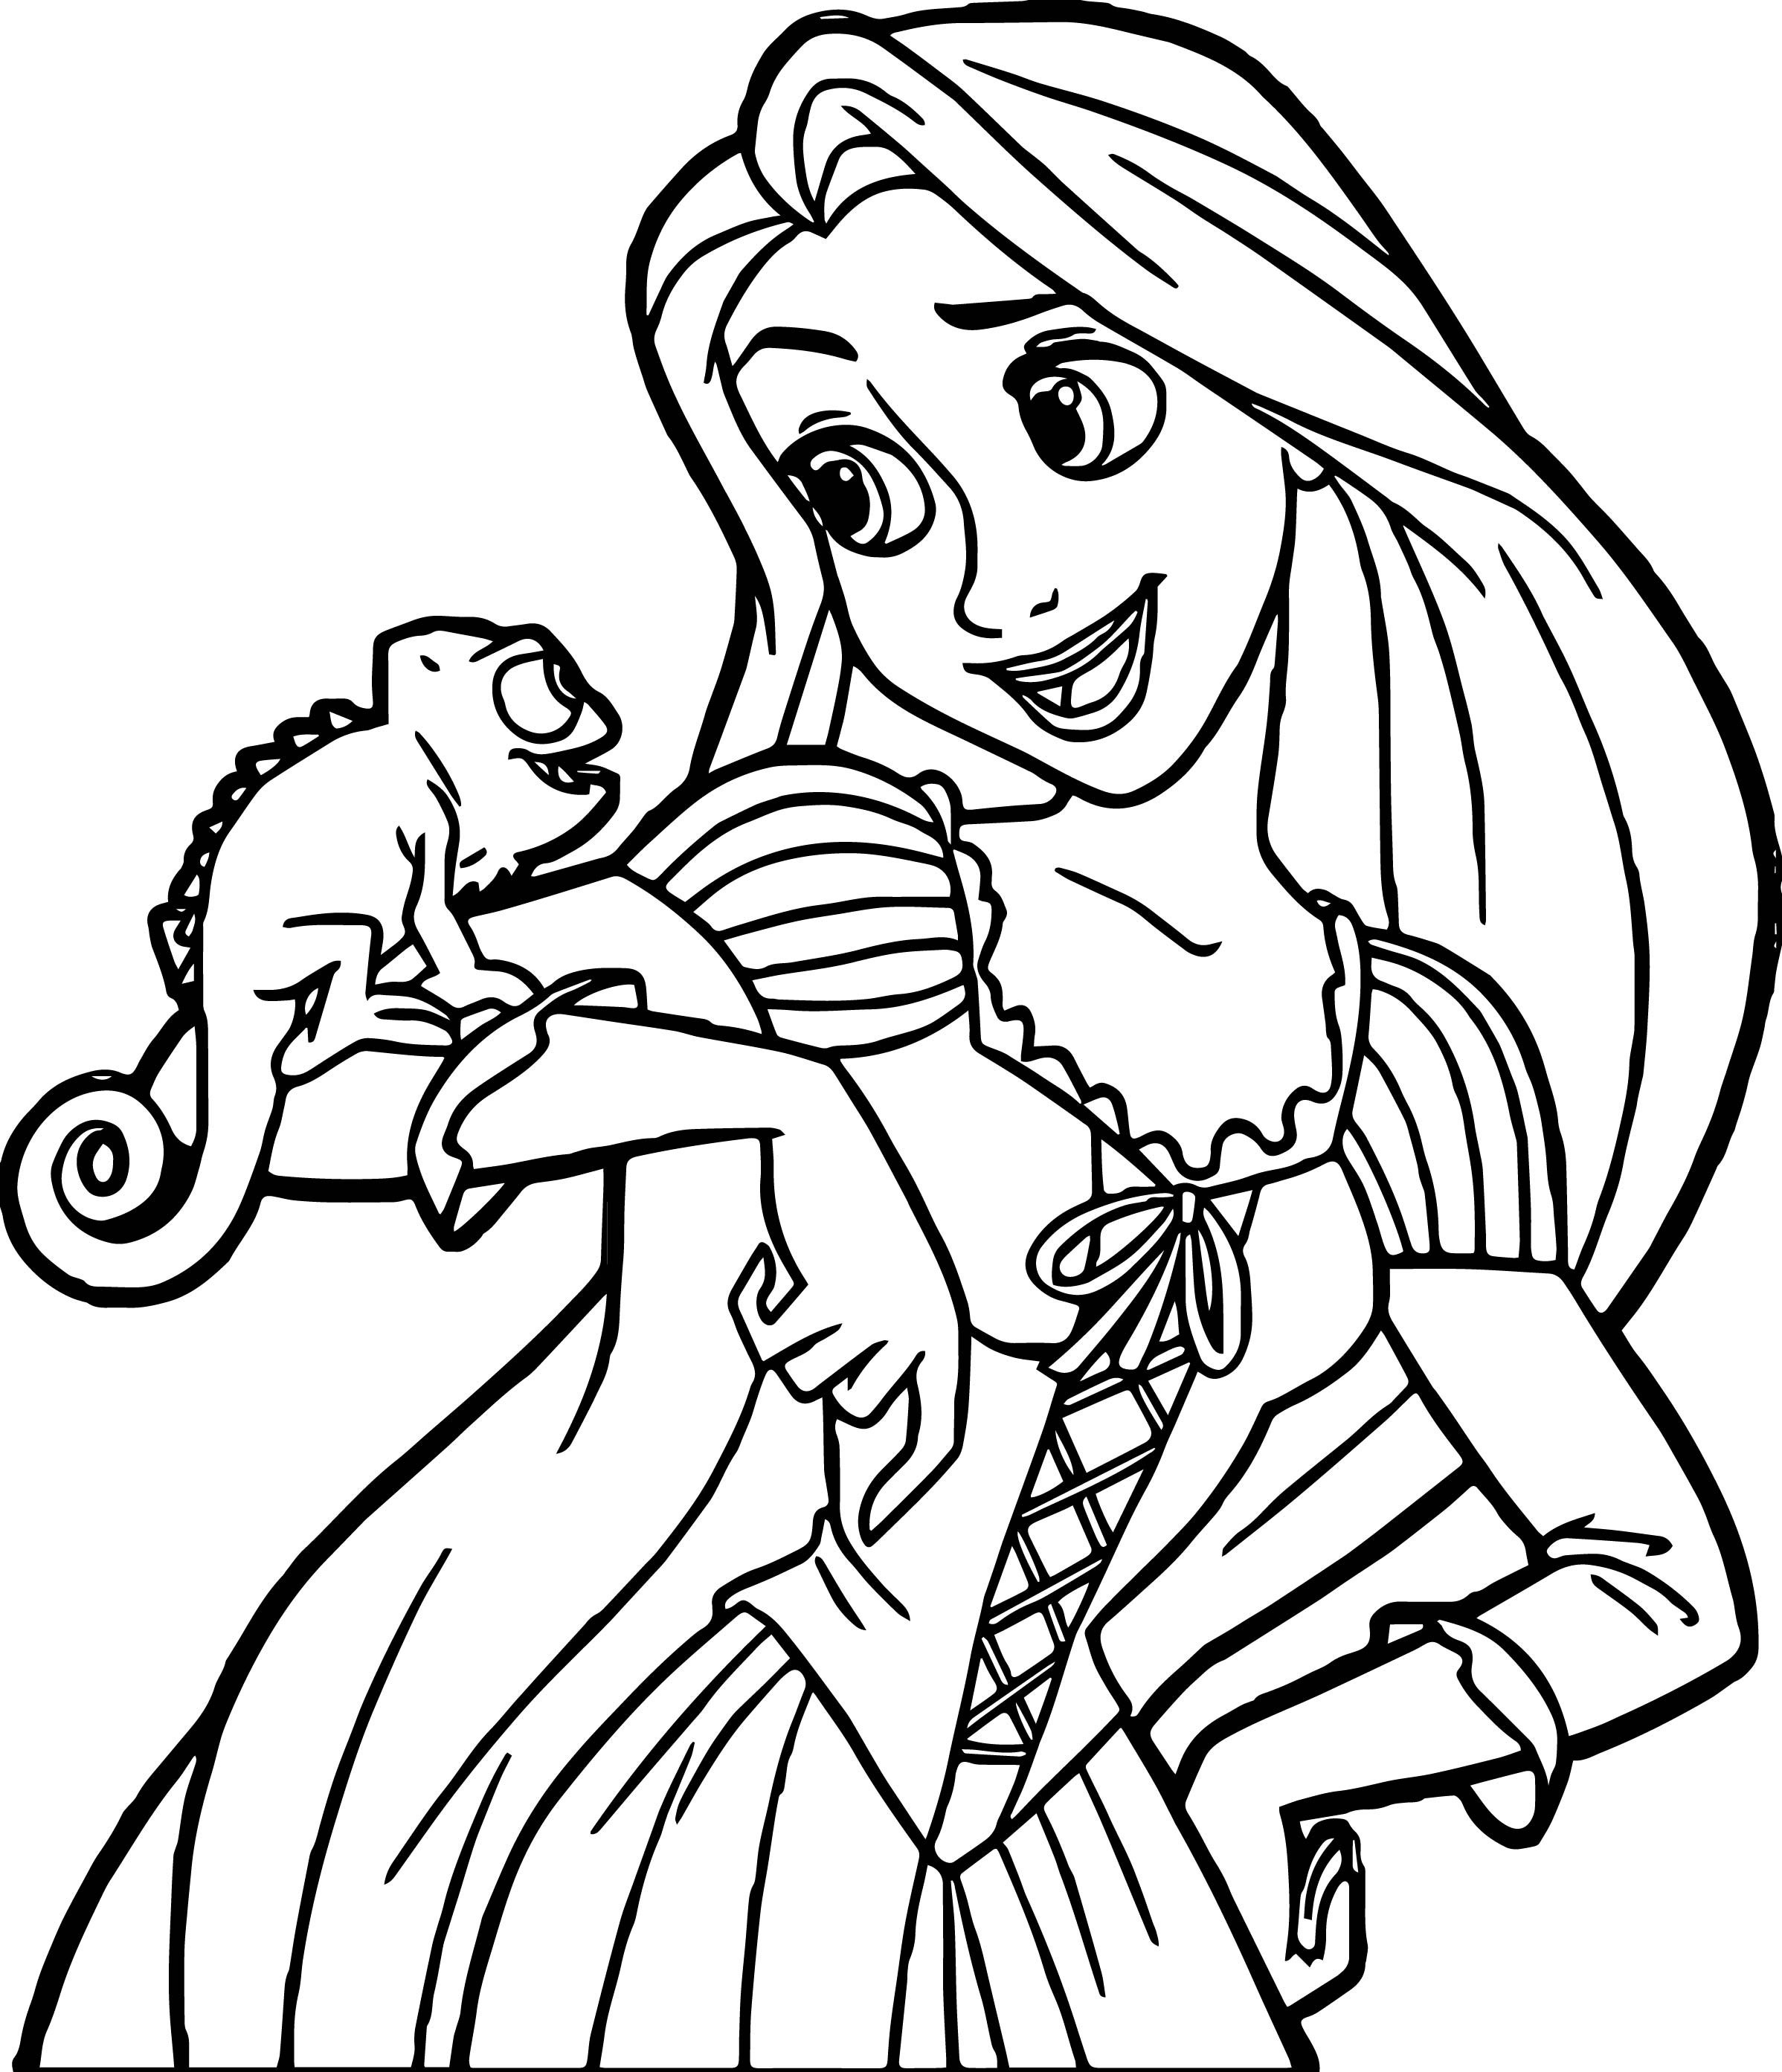 Disney Rapunzel Coloring Pages For Toddlers
 Lovely Rapunzel Printable Coloring Pages For Kids – Bleupnr